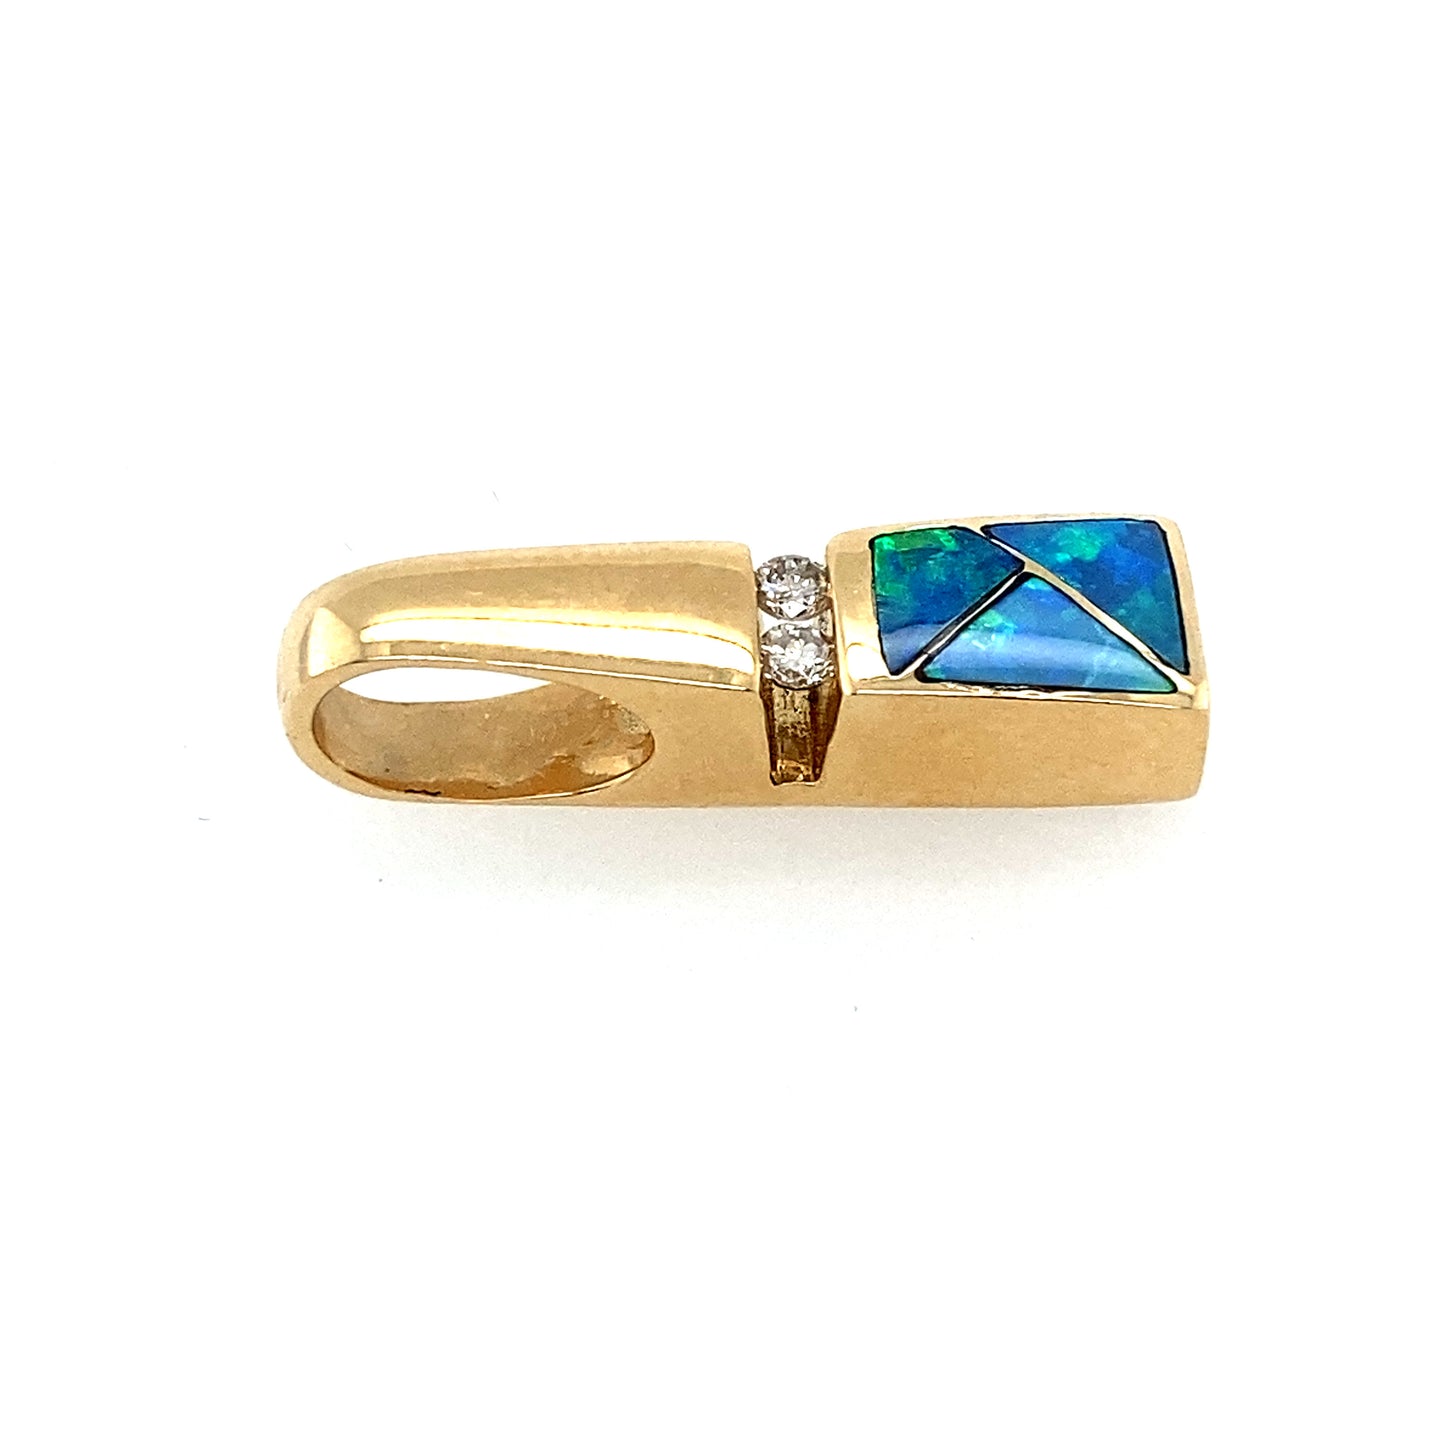 14k gold pendant with blu tone color fire opal stone. Up to the stone 2 pc good quality diamond .